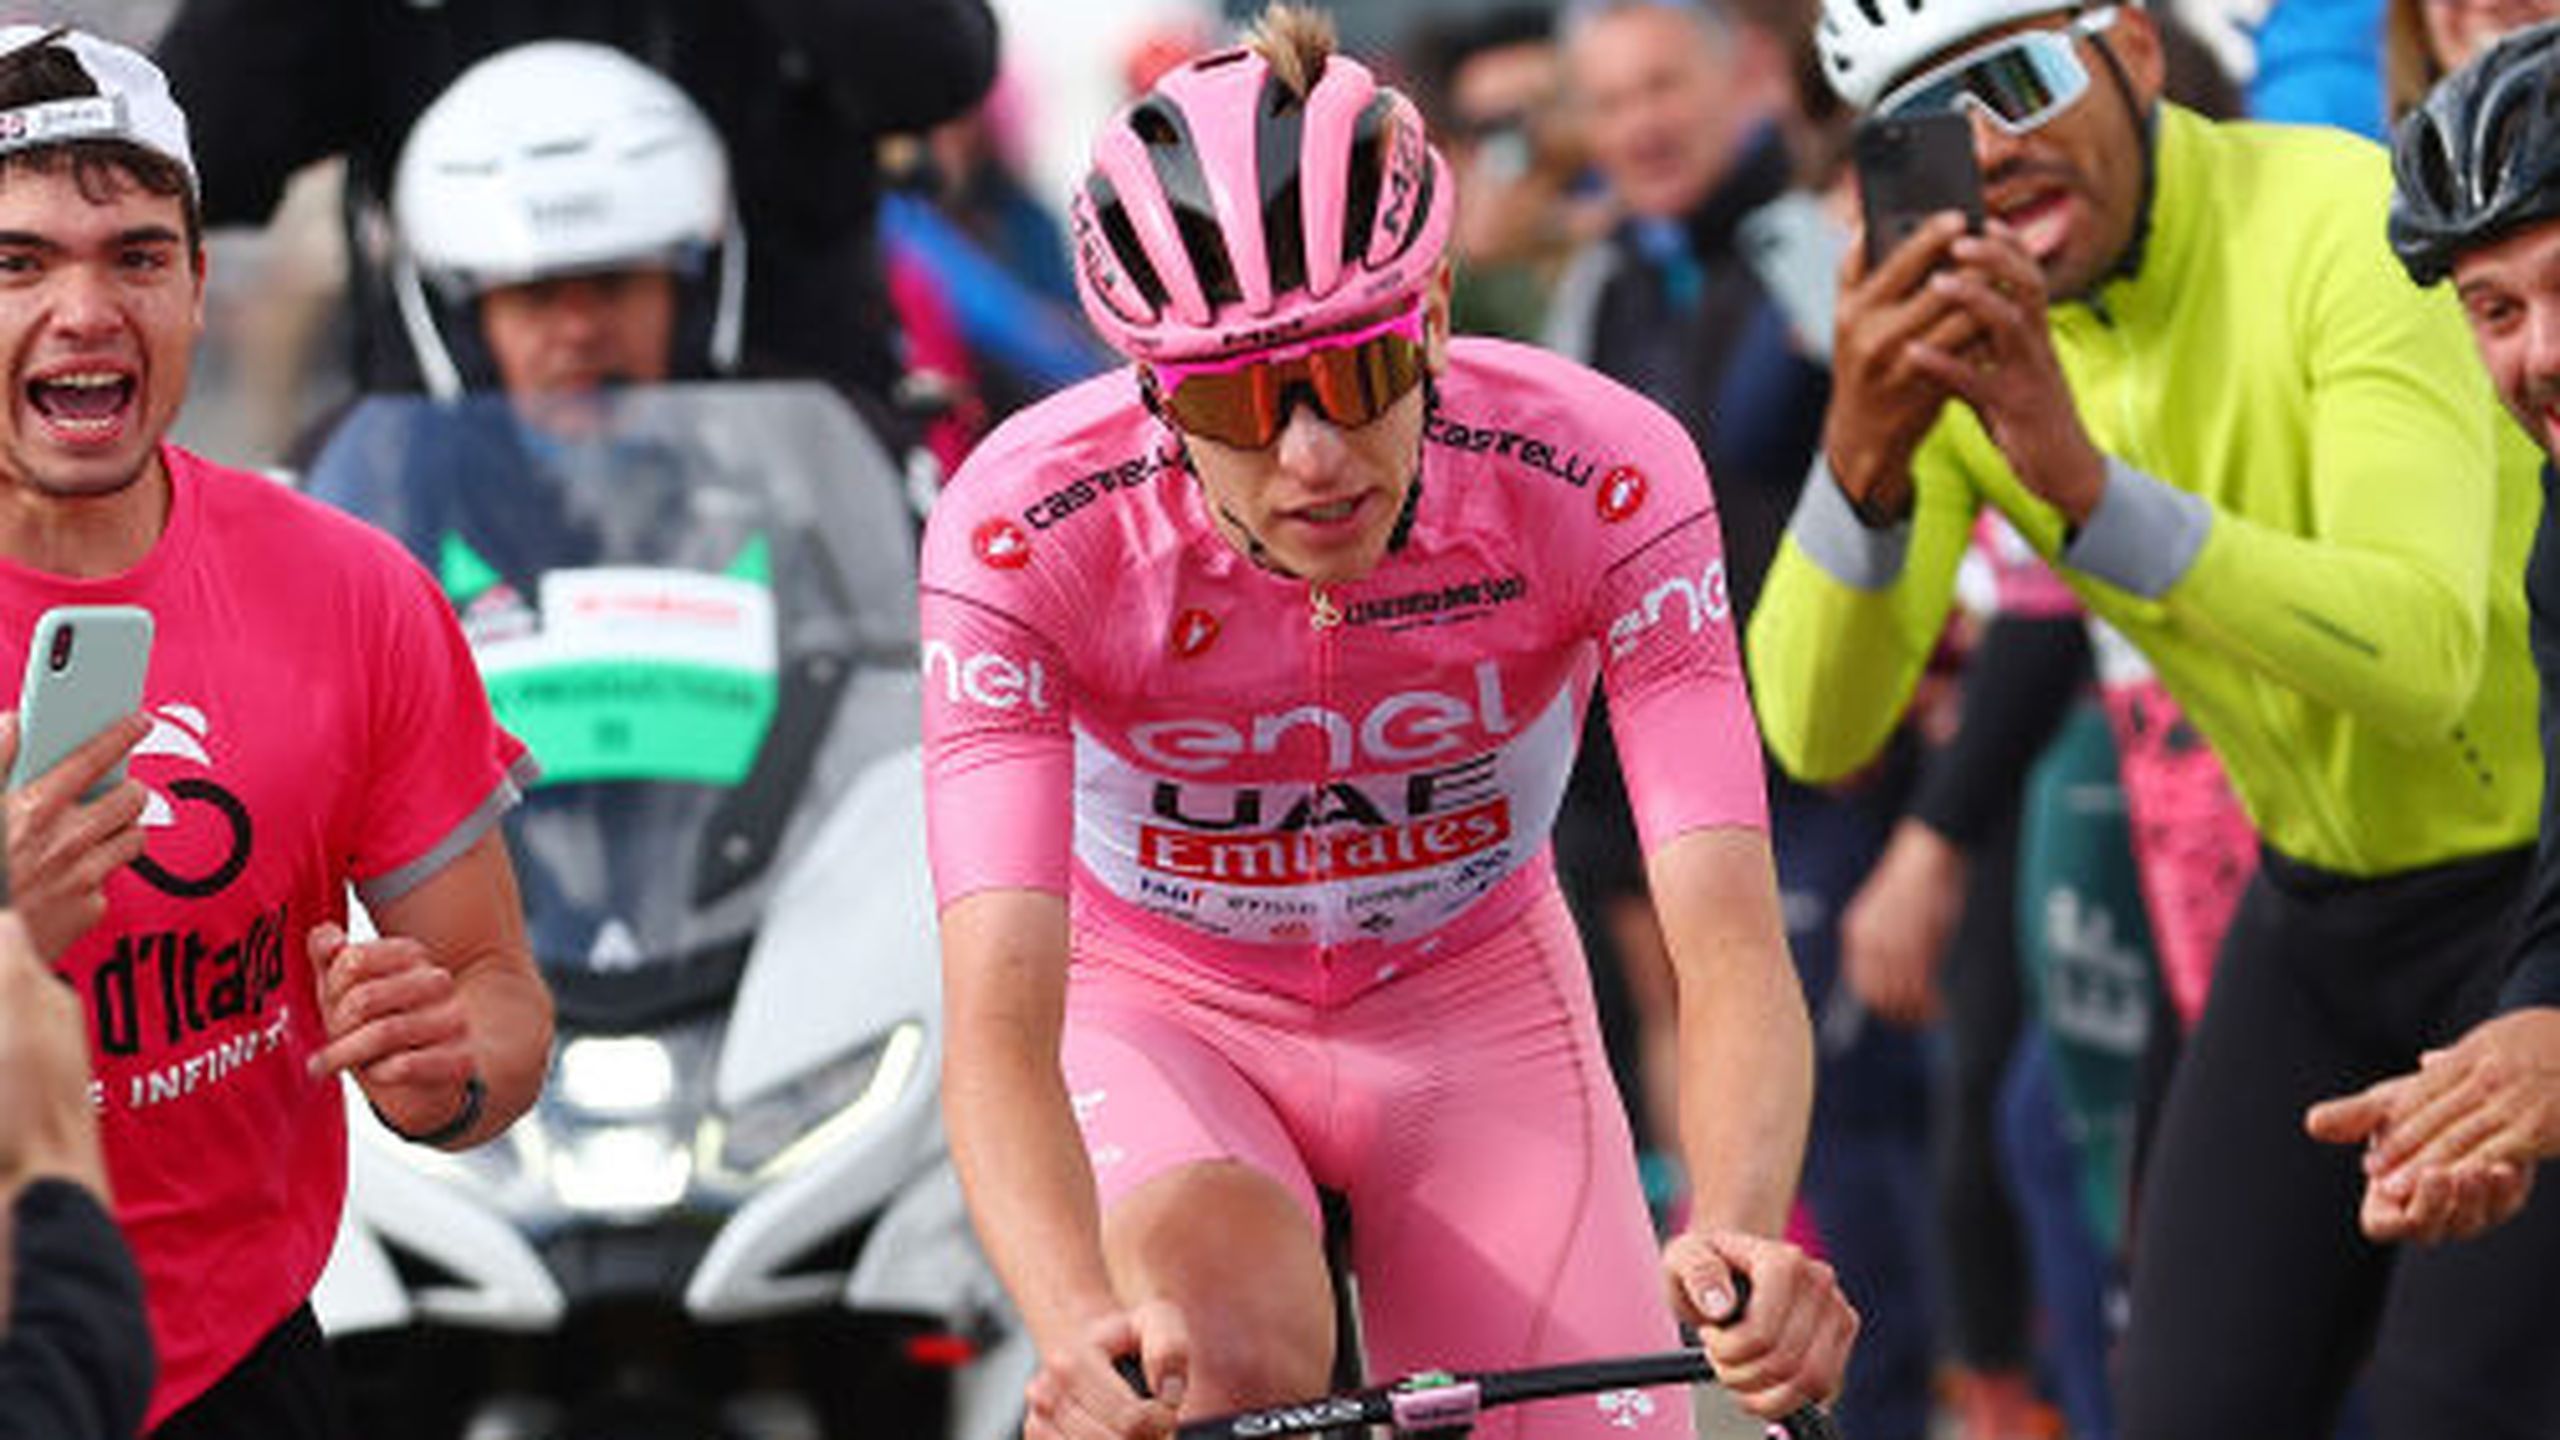 Geraint Thomas: Tadej Pogacar is “in a league of his own” and should aim for every stage win at Giro d’Italia